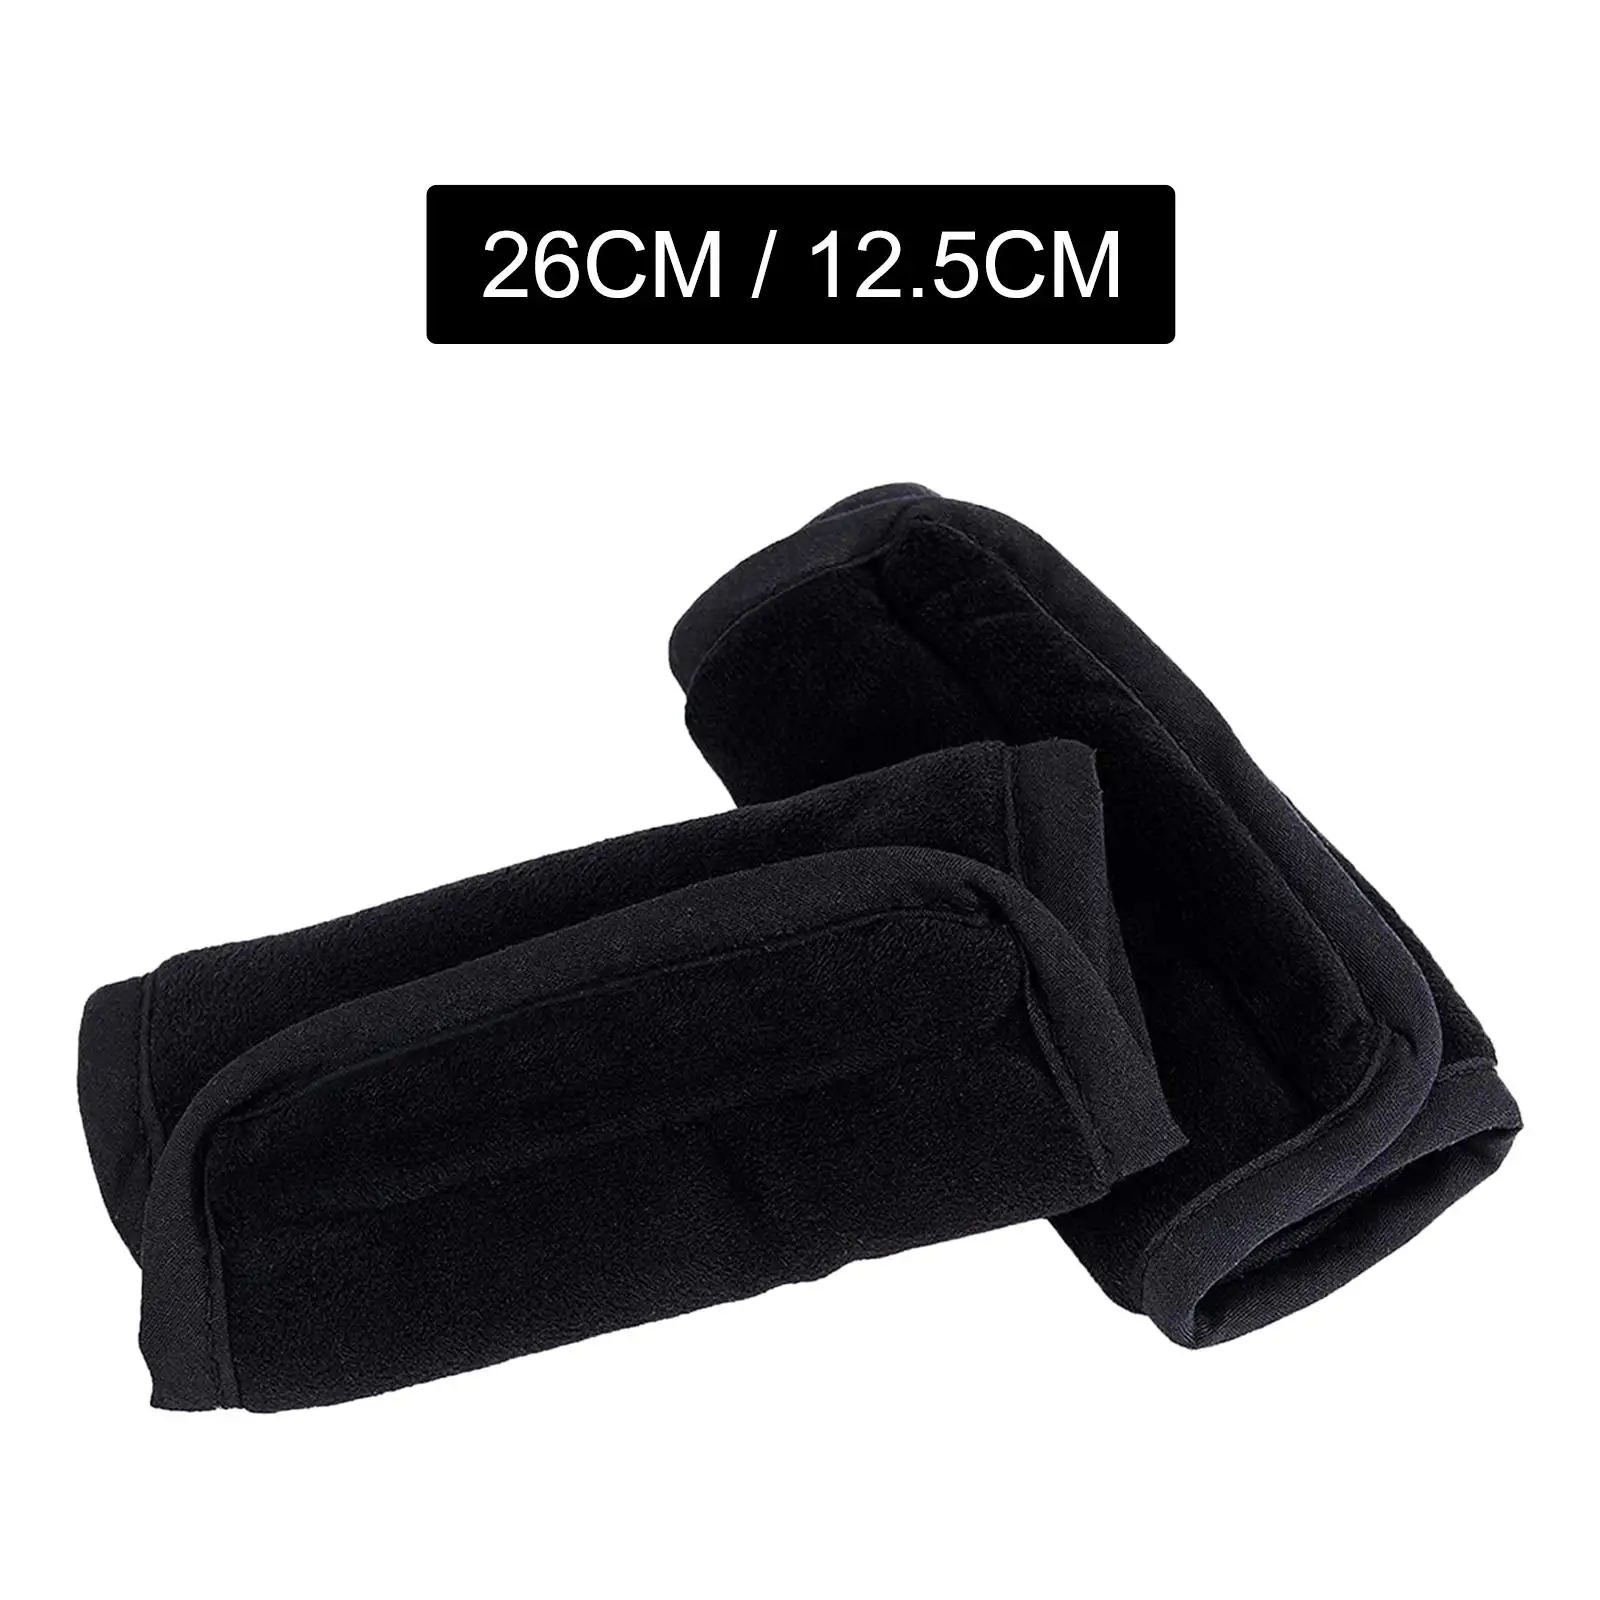 2 Pieces Car Seat Straps Covers Black Stroller Shoulder Covers for Stroller